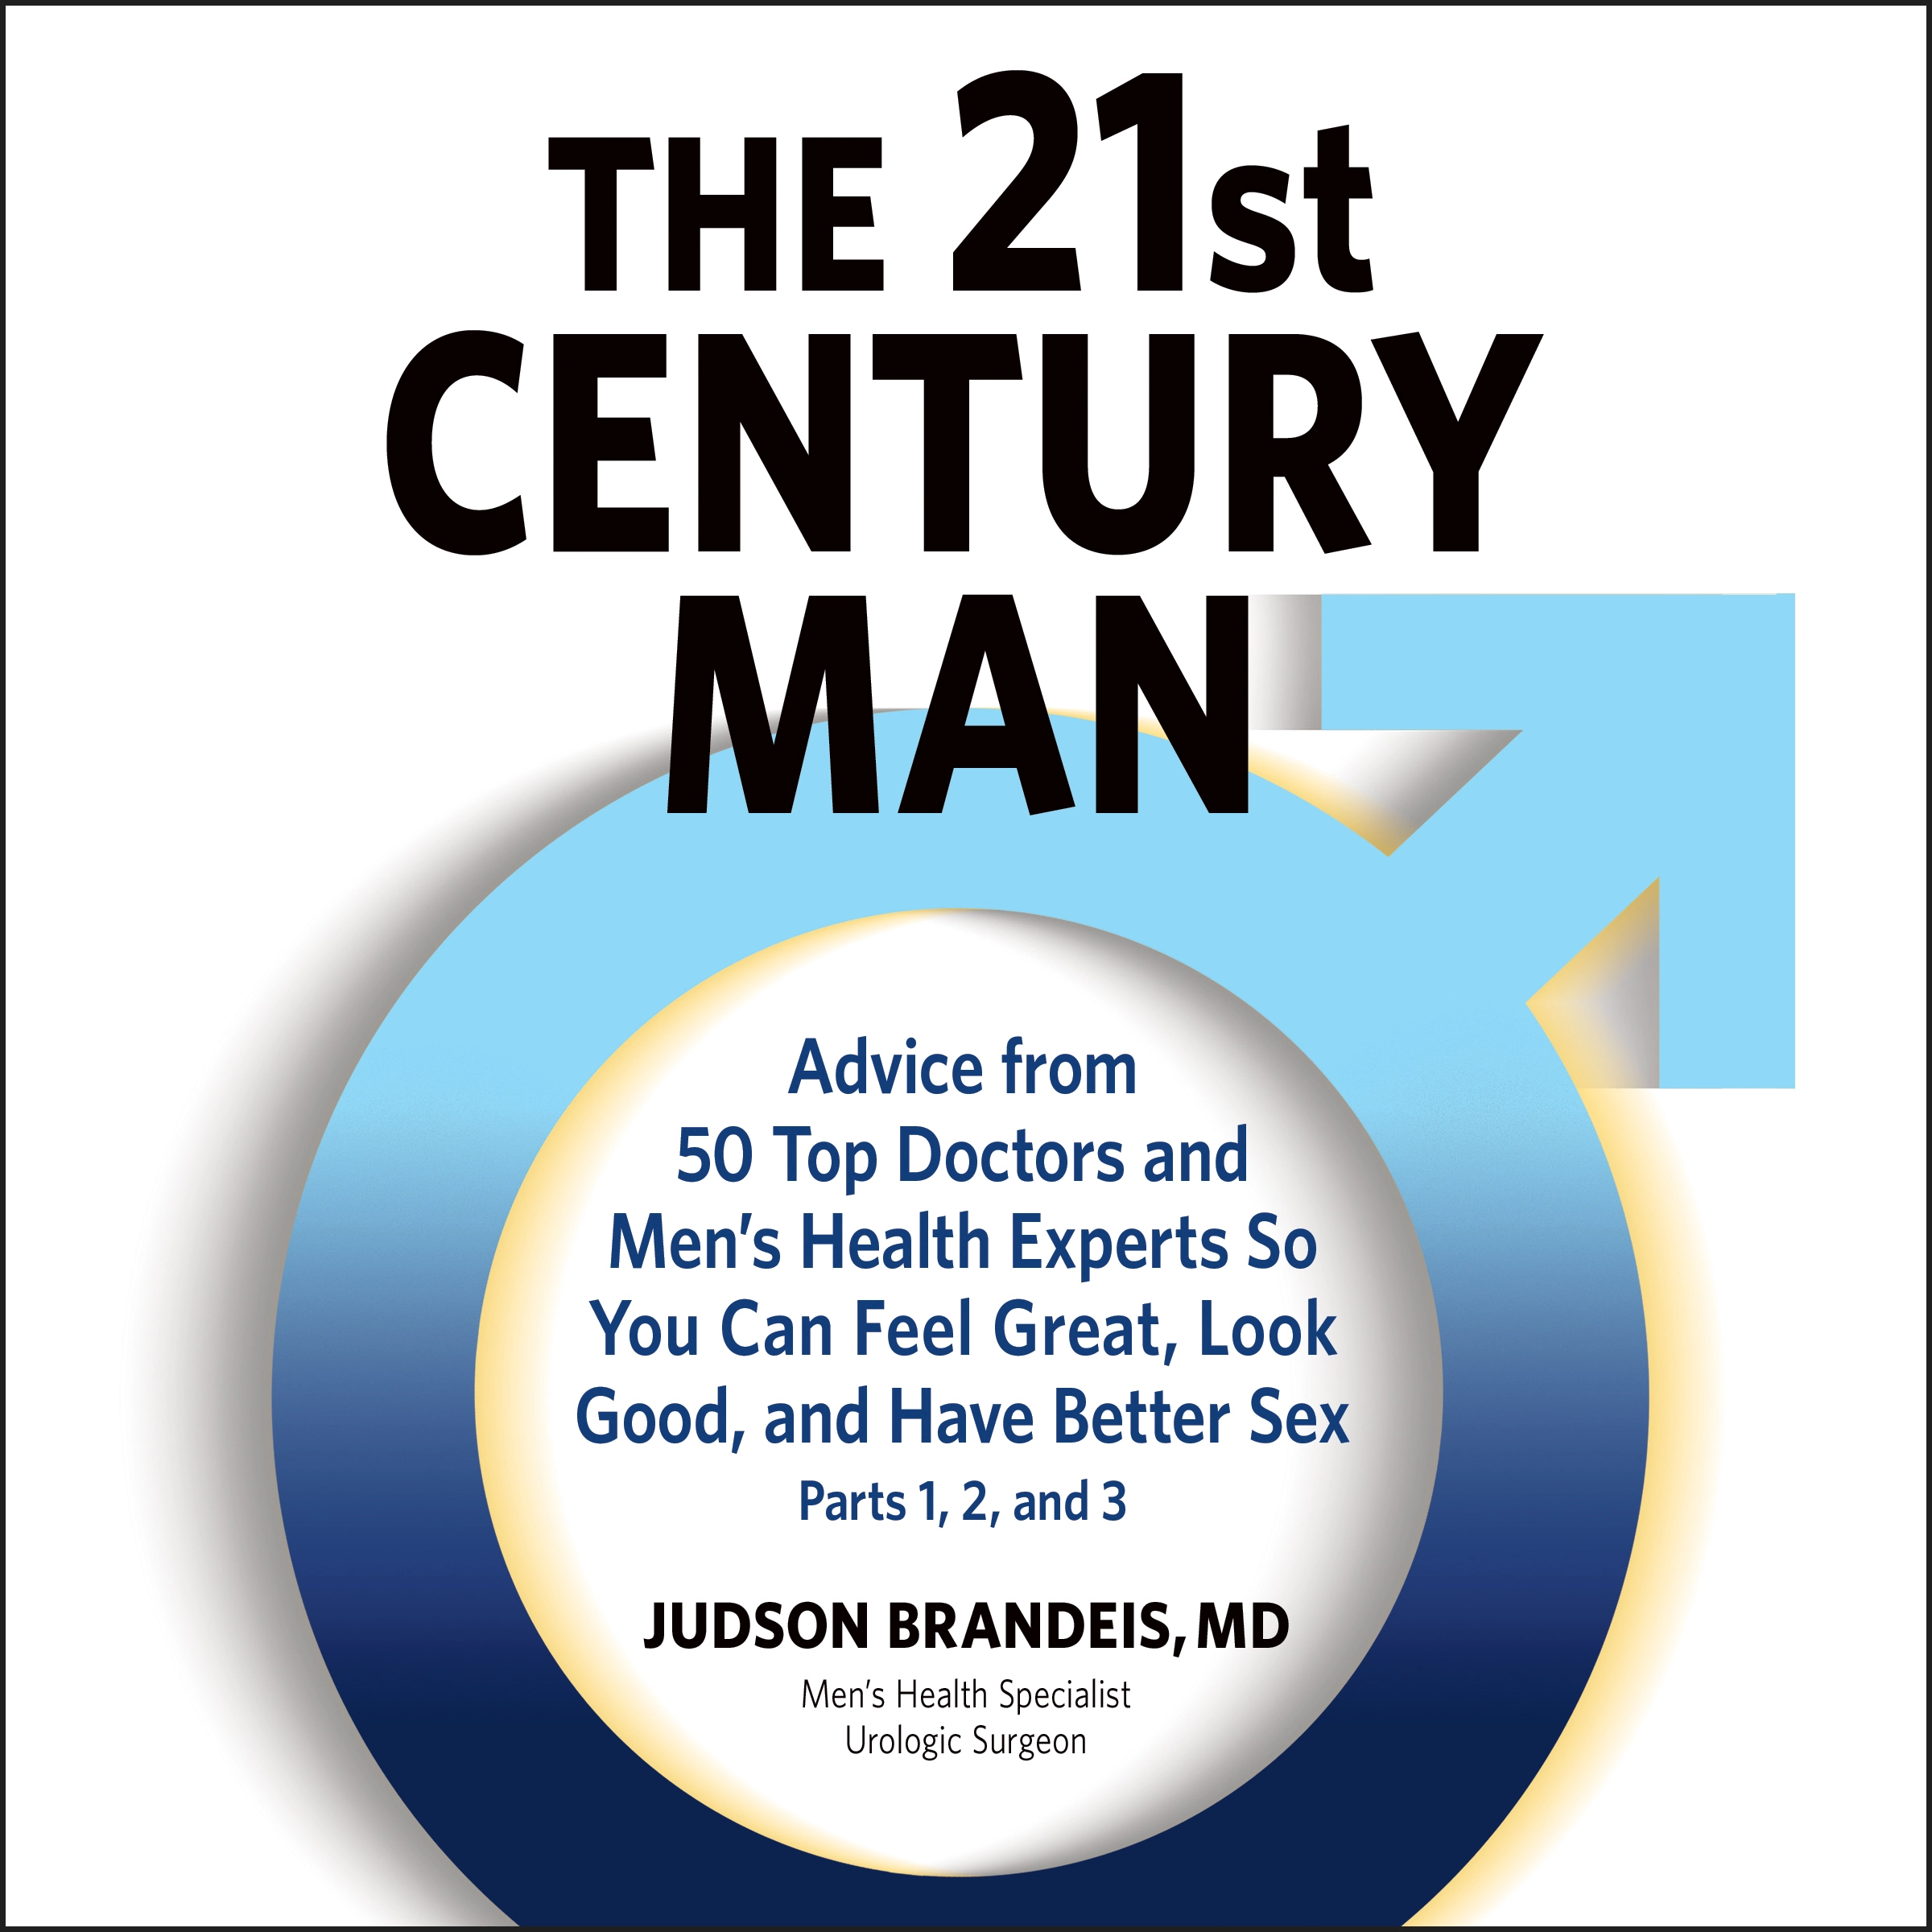 The 21st Century Man: Parts 1, 2 and 3 by Judson Brandeis M.D. Audiobook